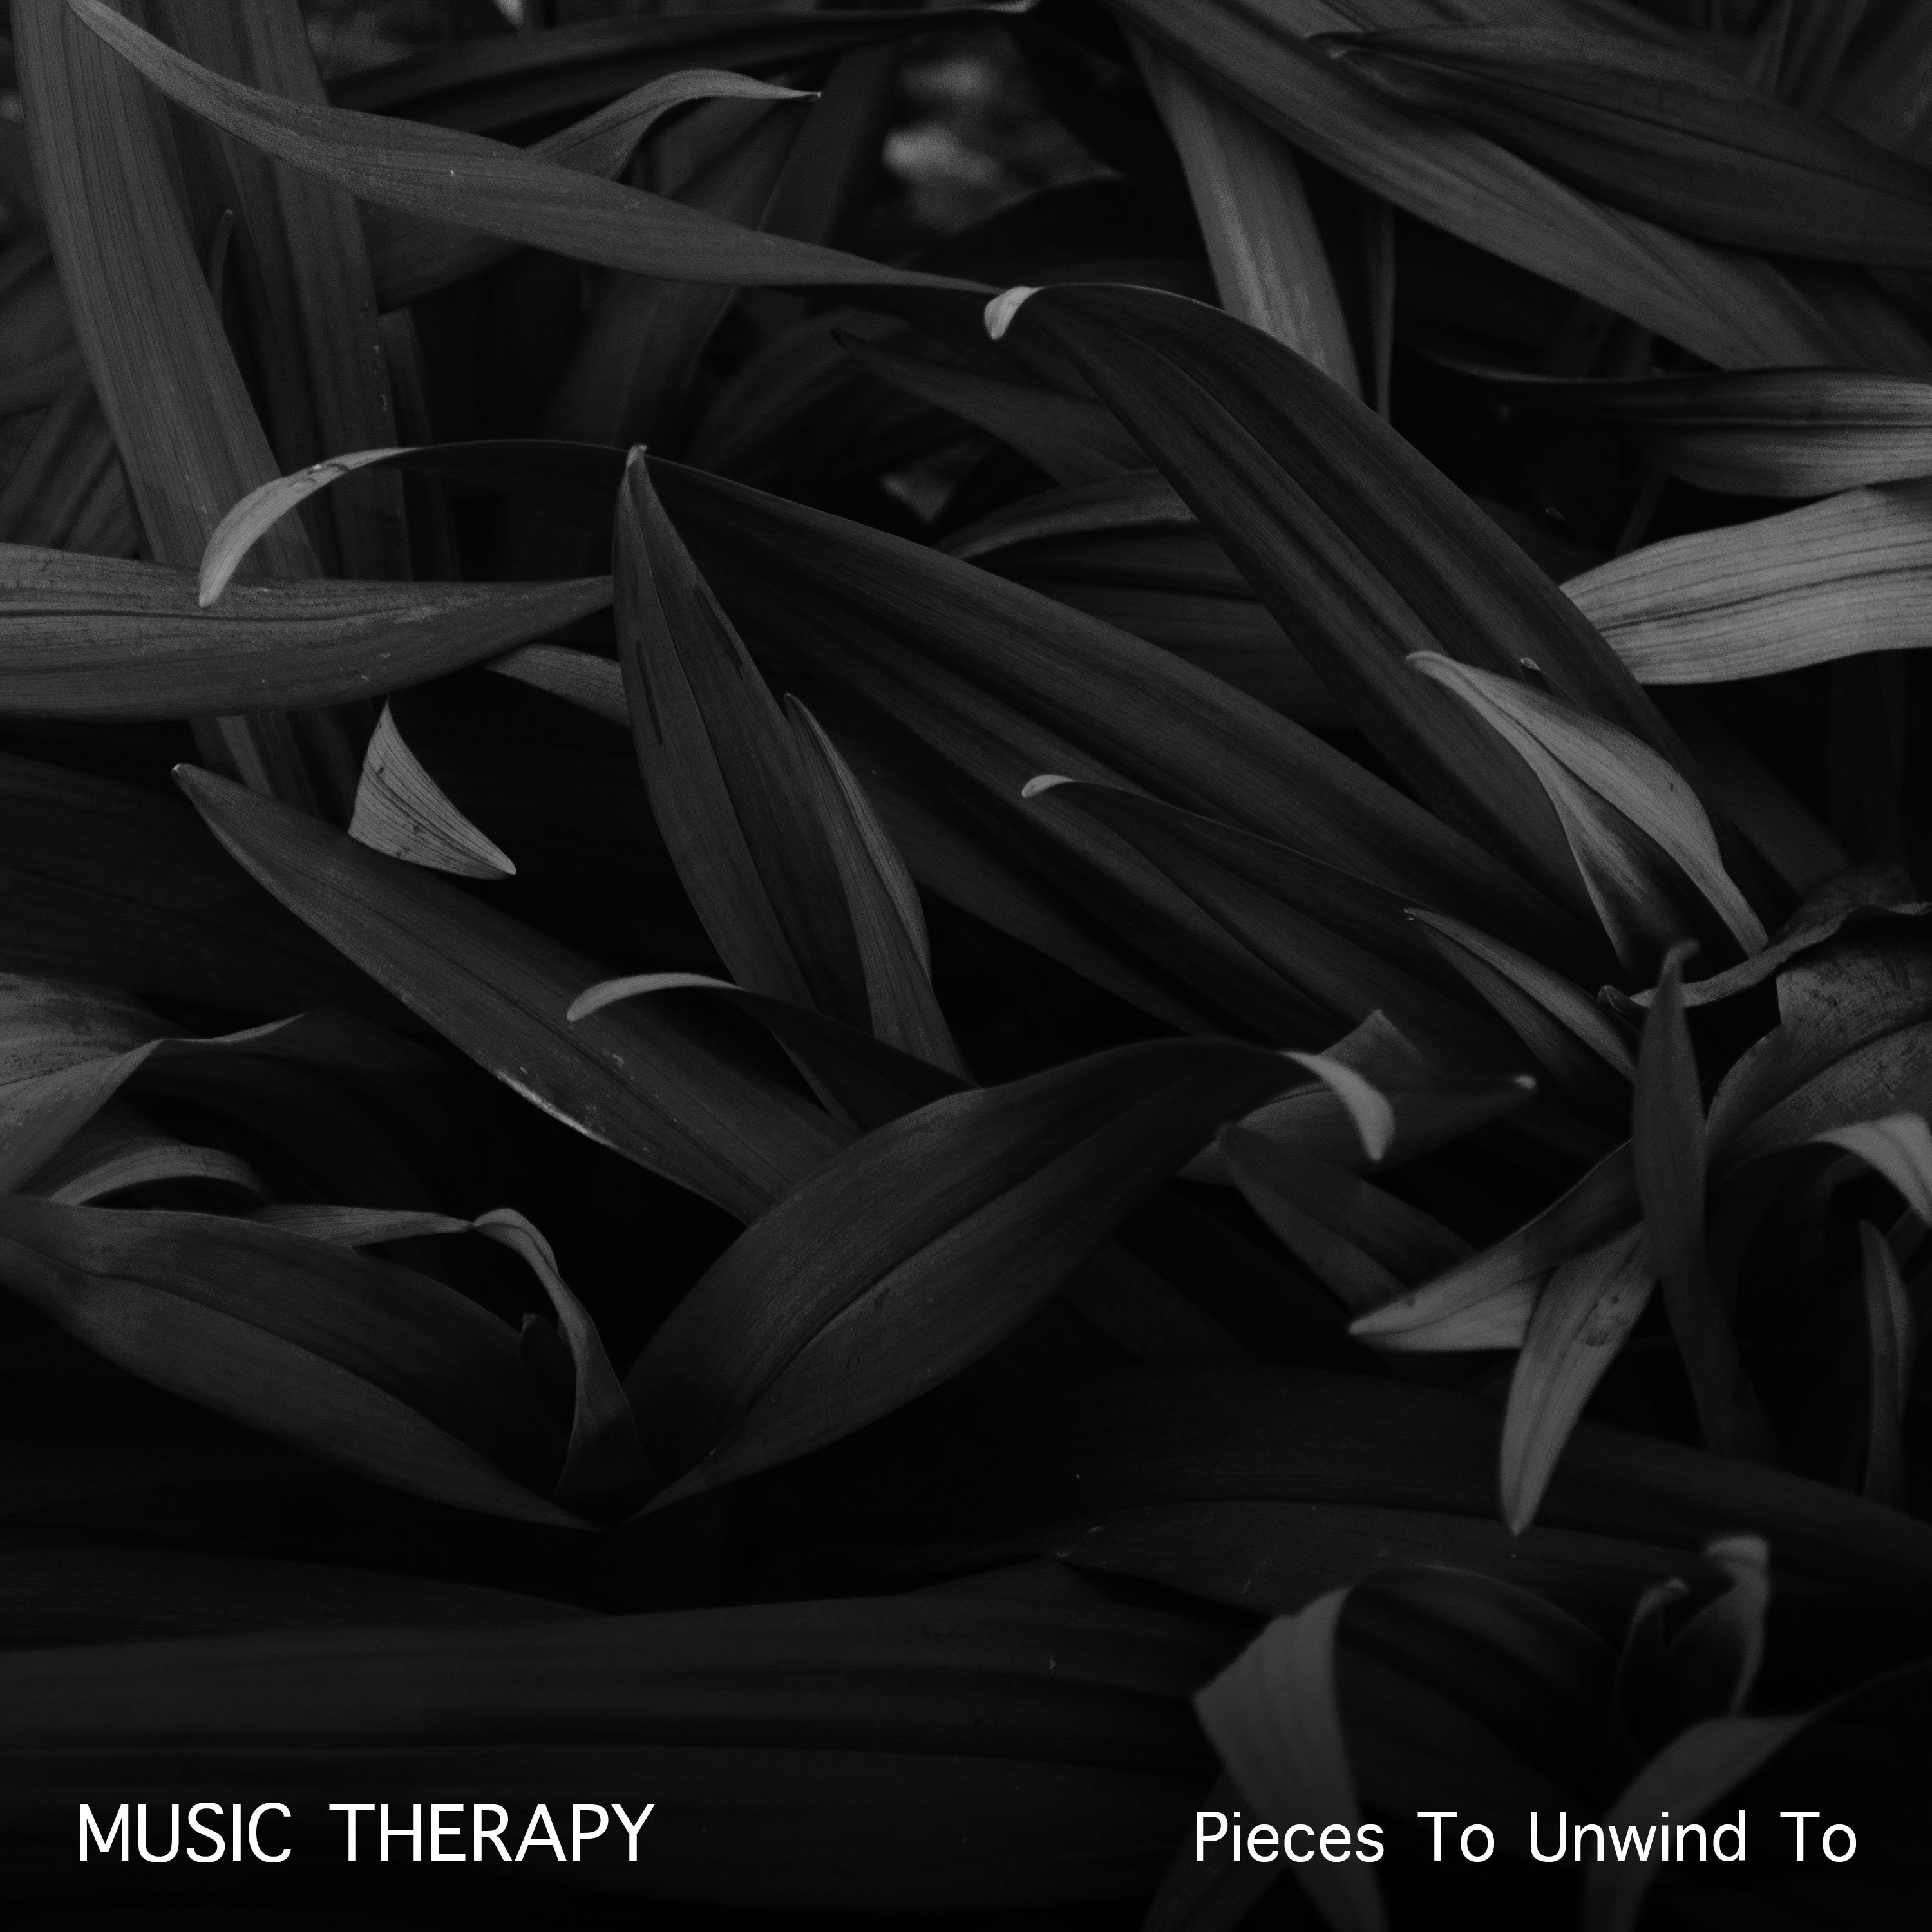 12 Relaxing Music Therapy Pieces to Unwind